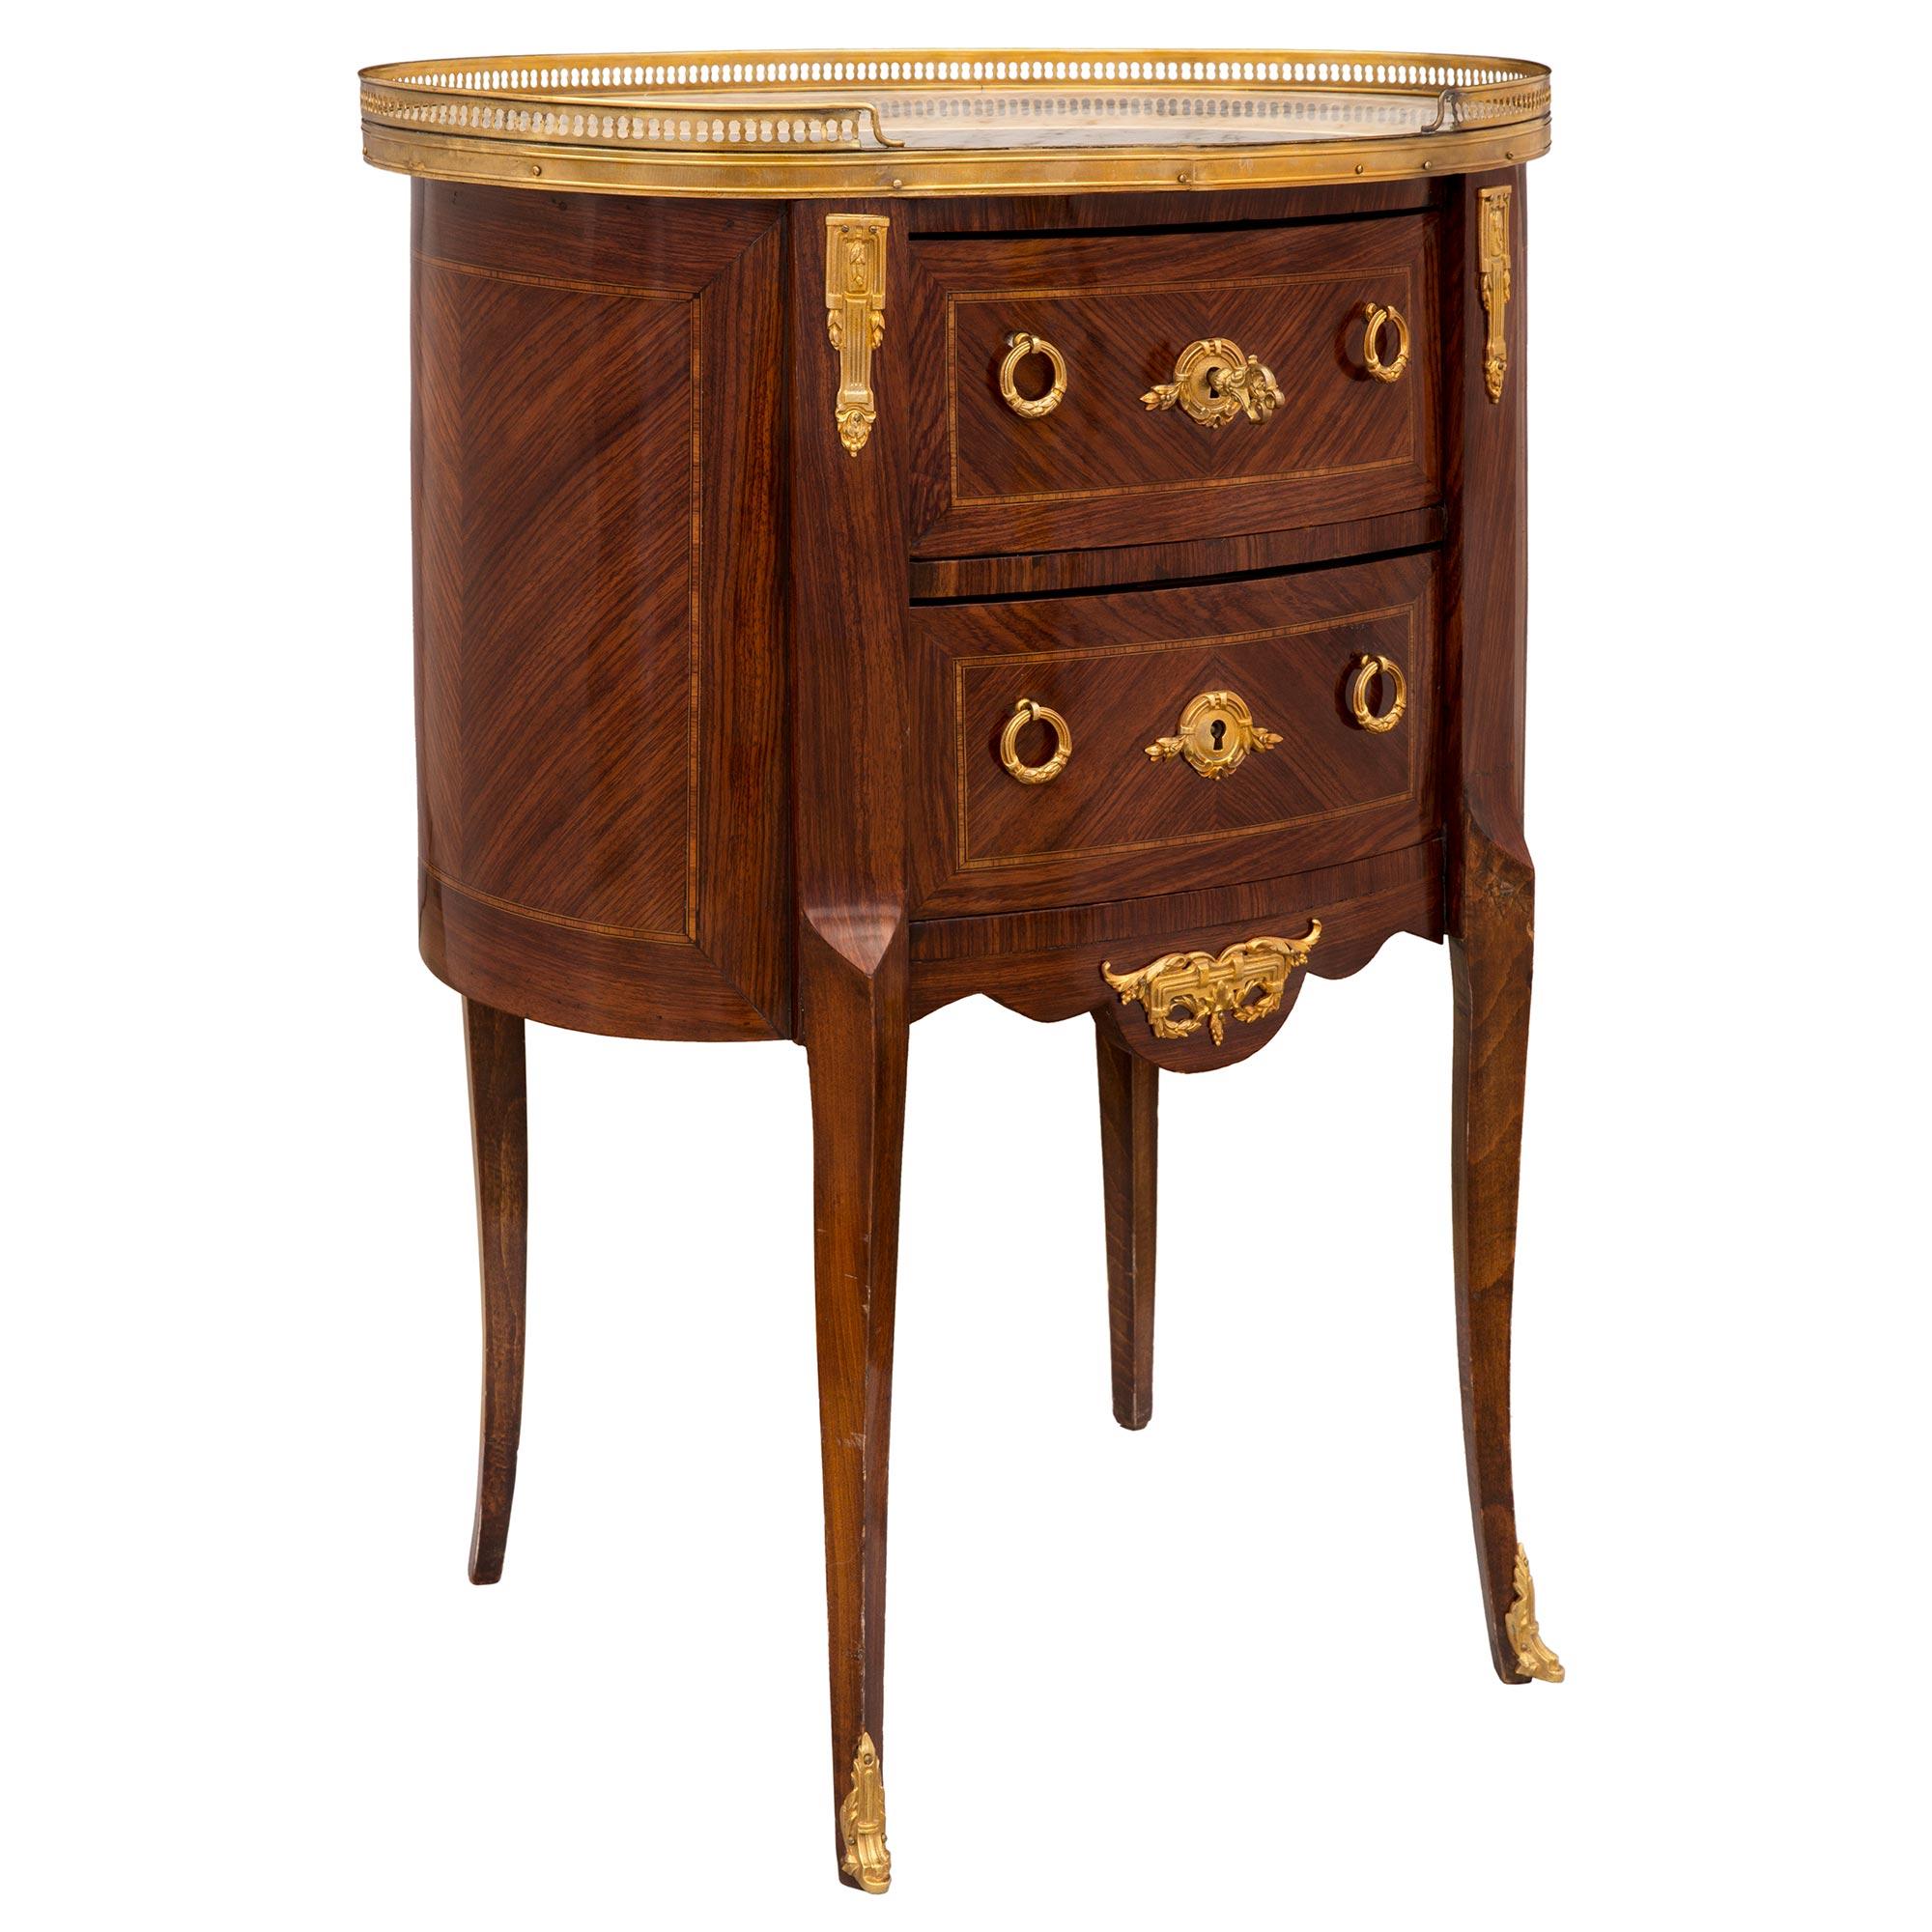 French 19th Century Transitional Style Kingwood, Boxwood and Ormolu Side Table In Good Condition For Sale In West Palm Beach, FL